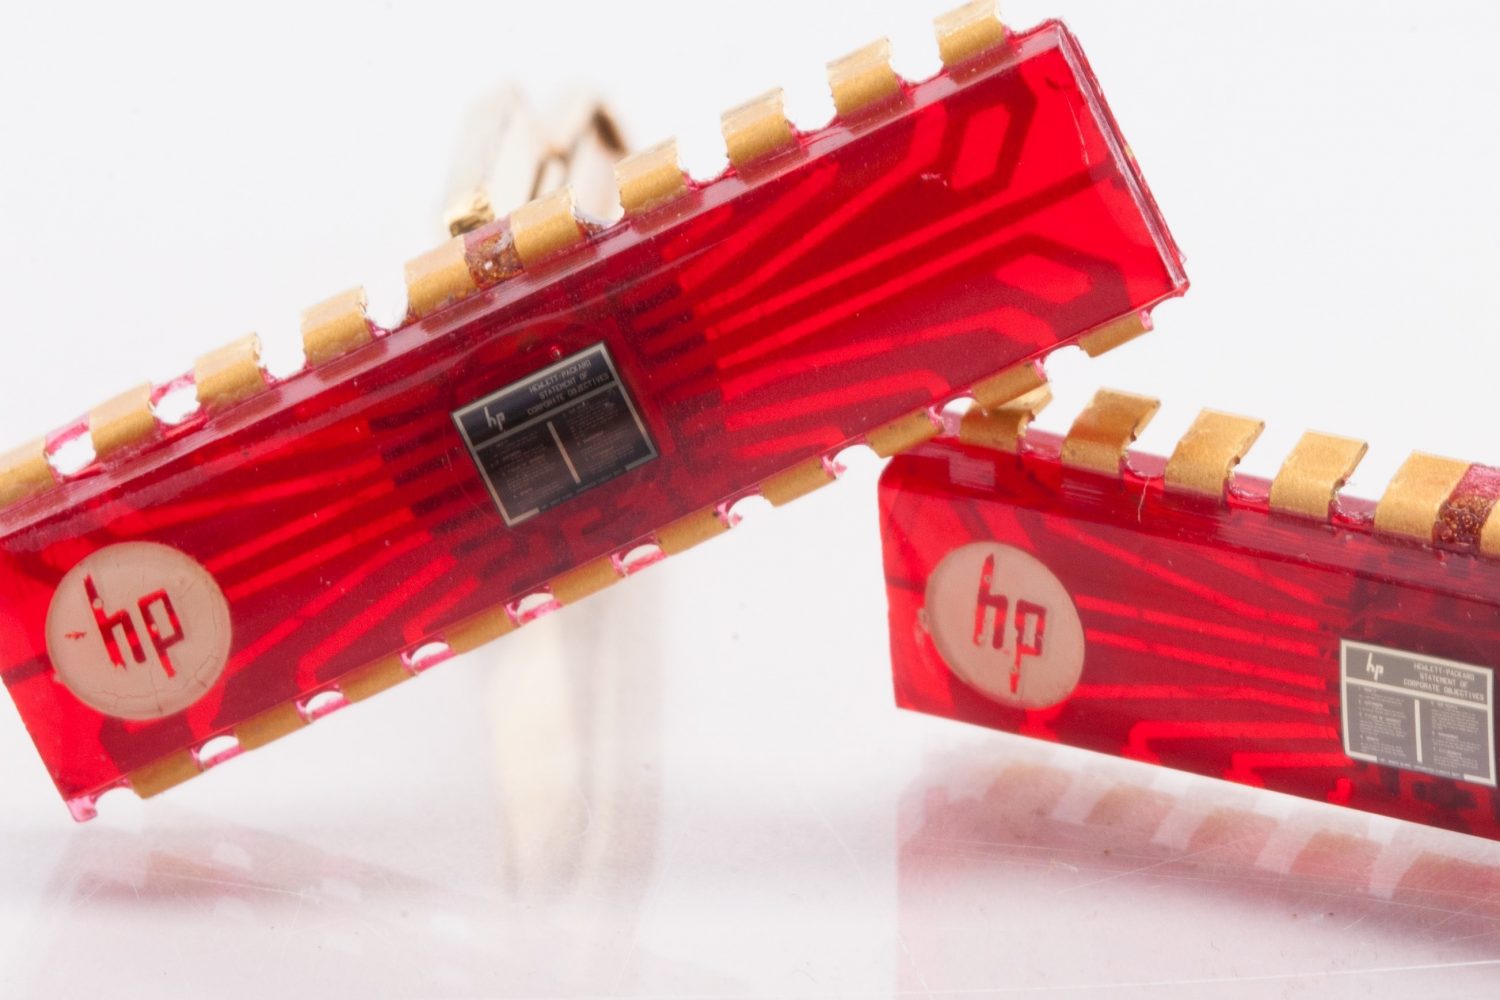 Two gold HP cufflinks with red chips and company objectives printed on a tiny chip in the center of each one.